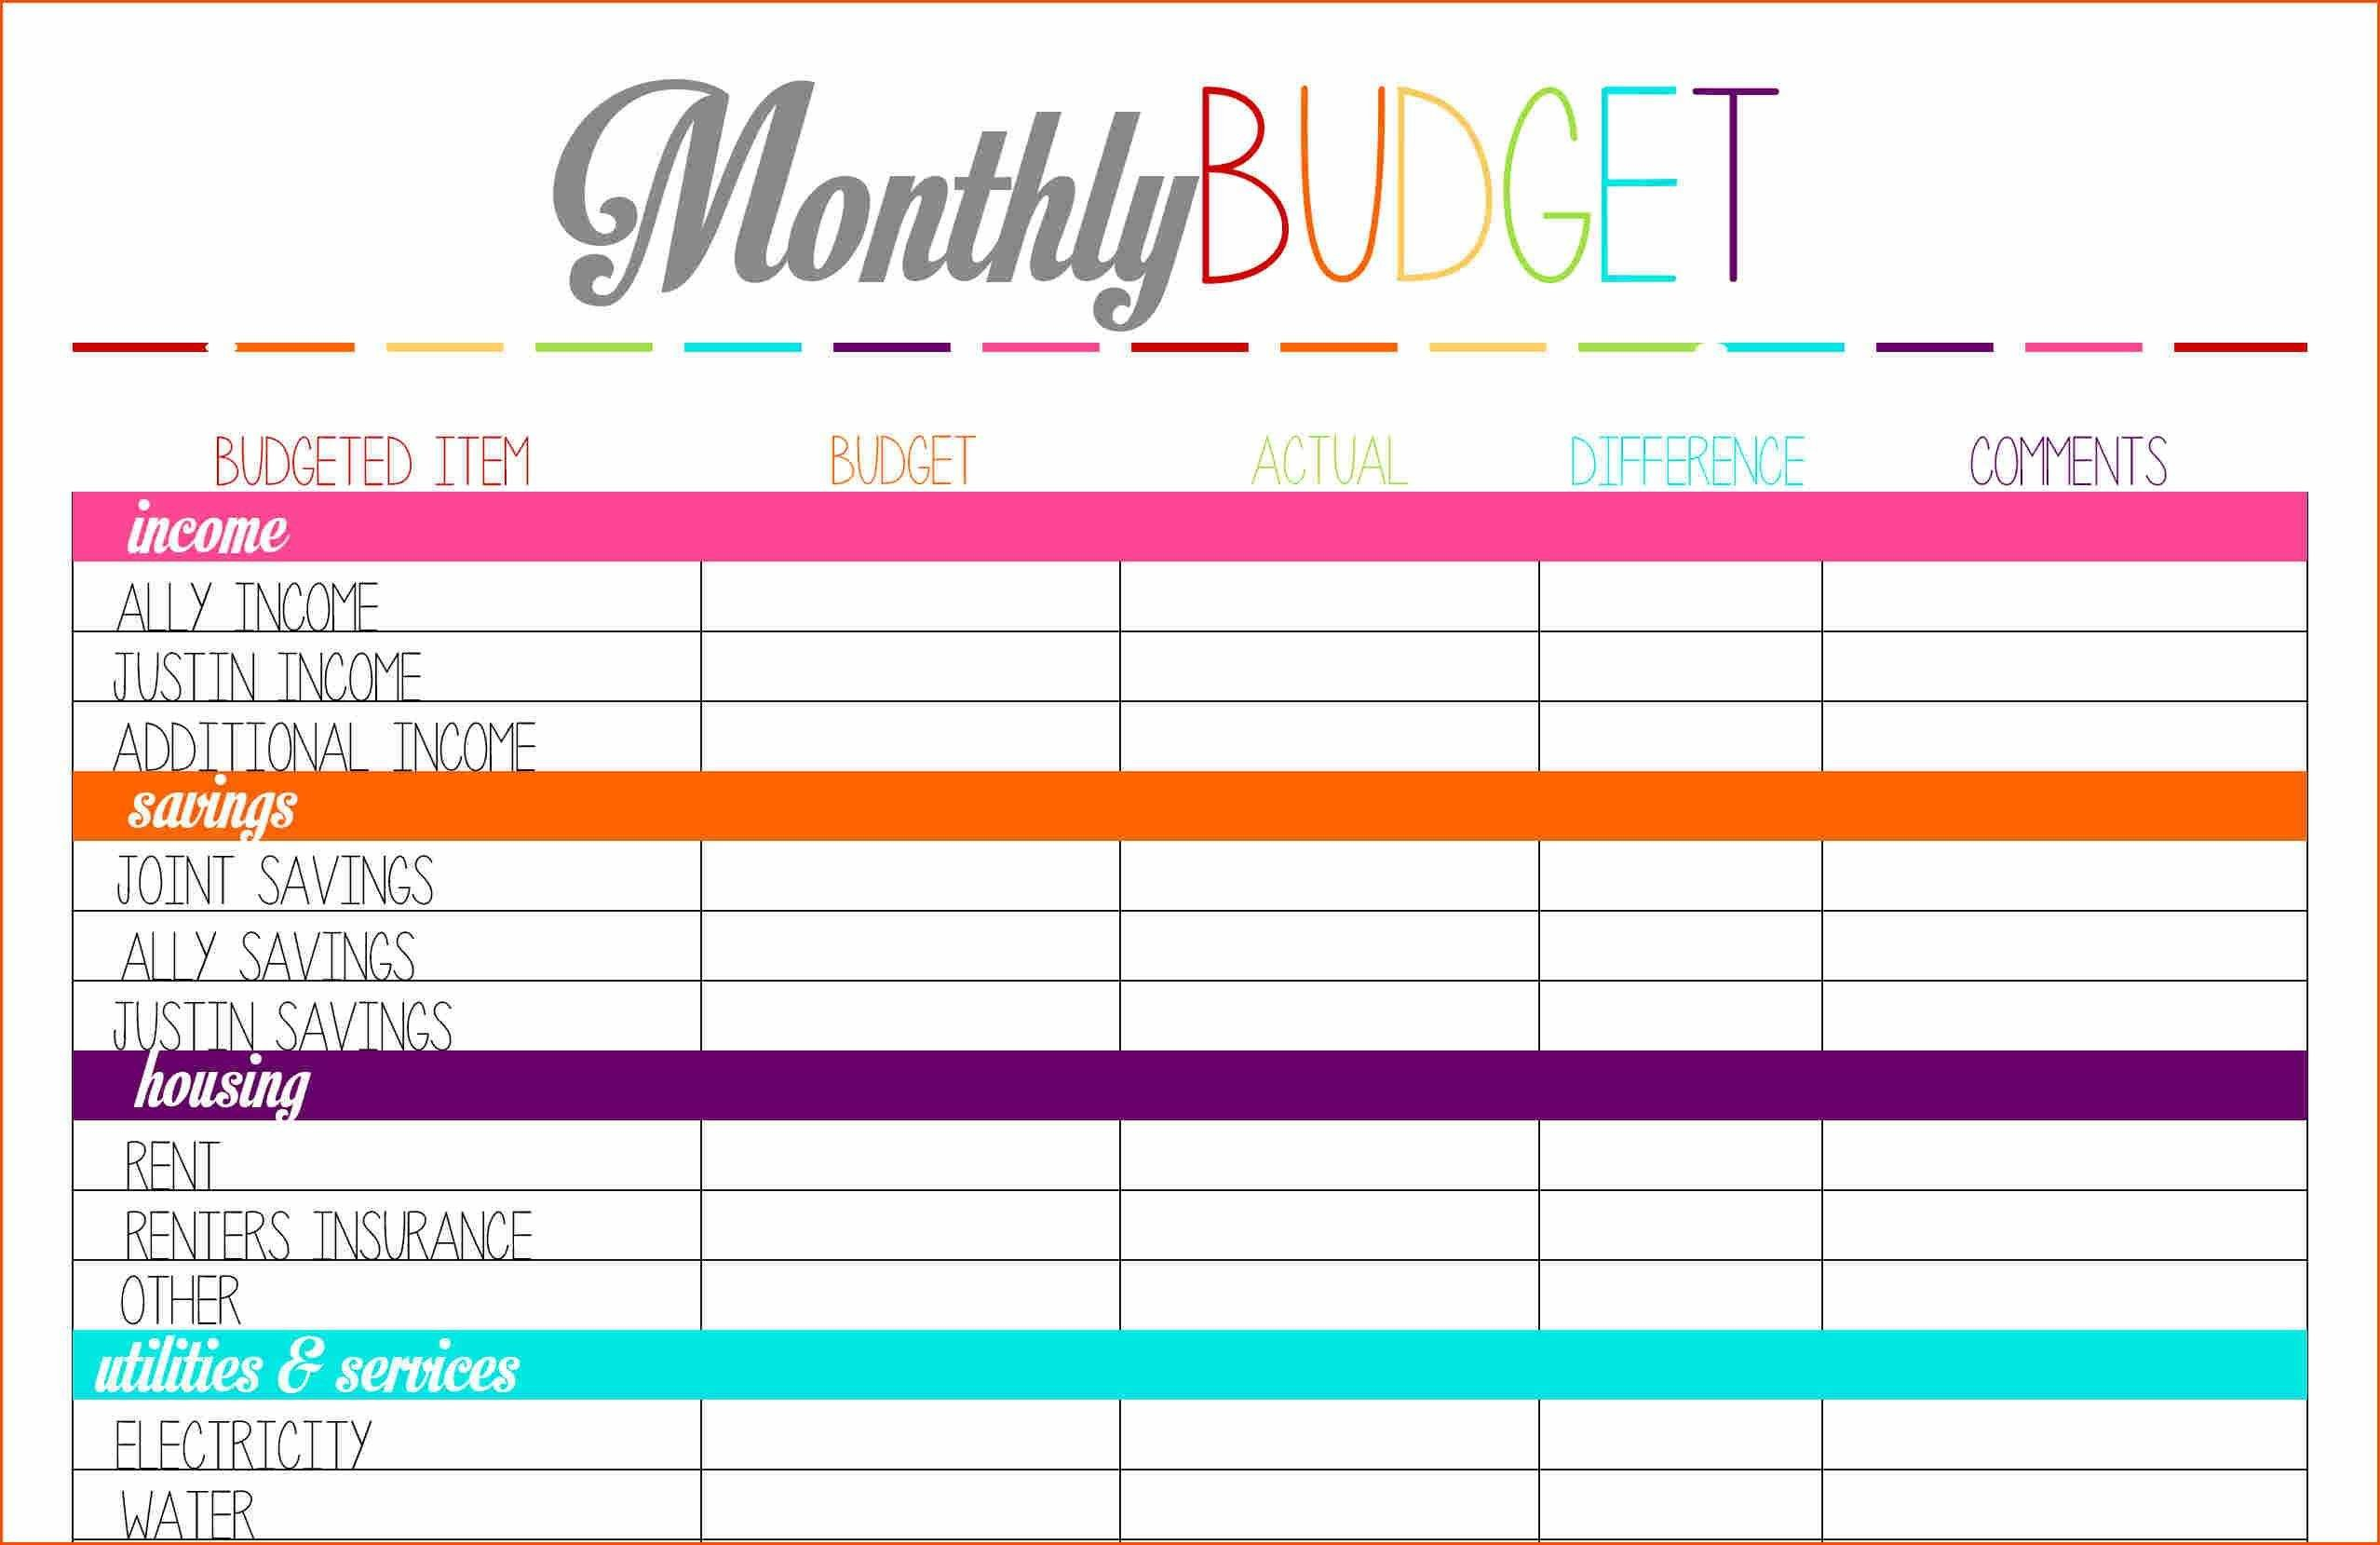 Simple Monthly Budget Spreadsheet Eet For Young Adults Personal Pdf Together With Basic Budget Worksheet For Young Adults